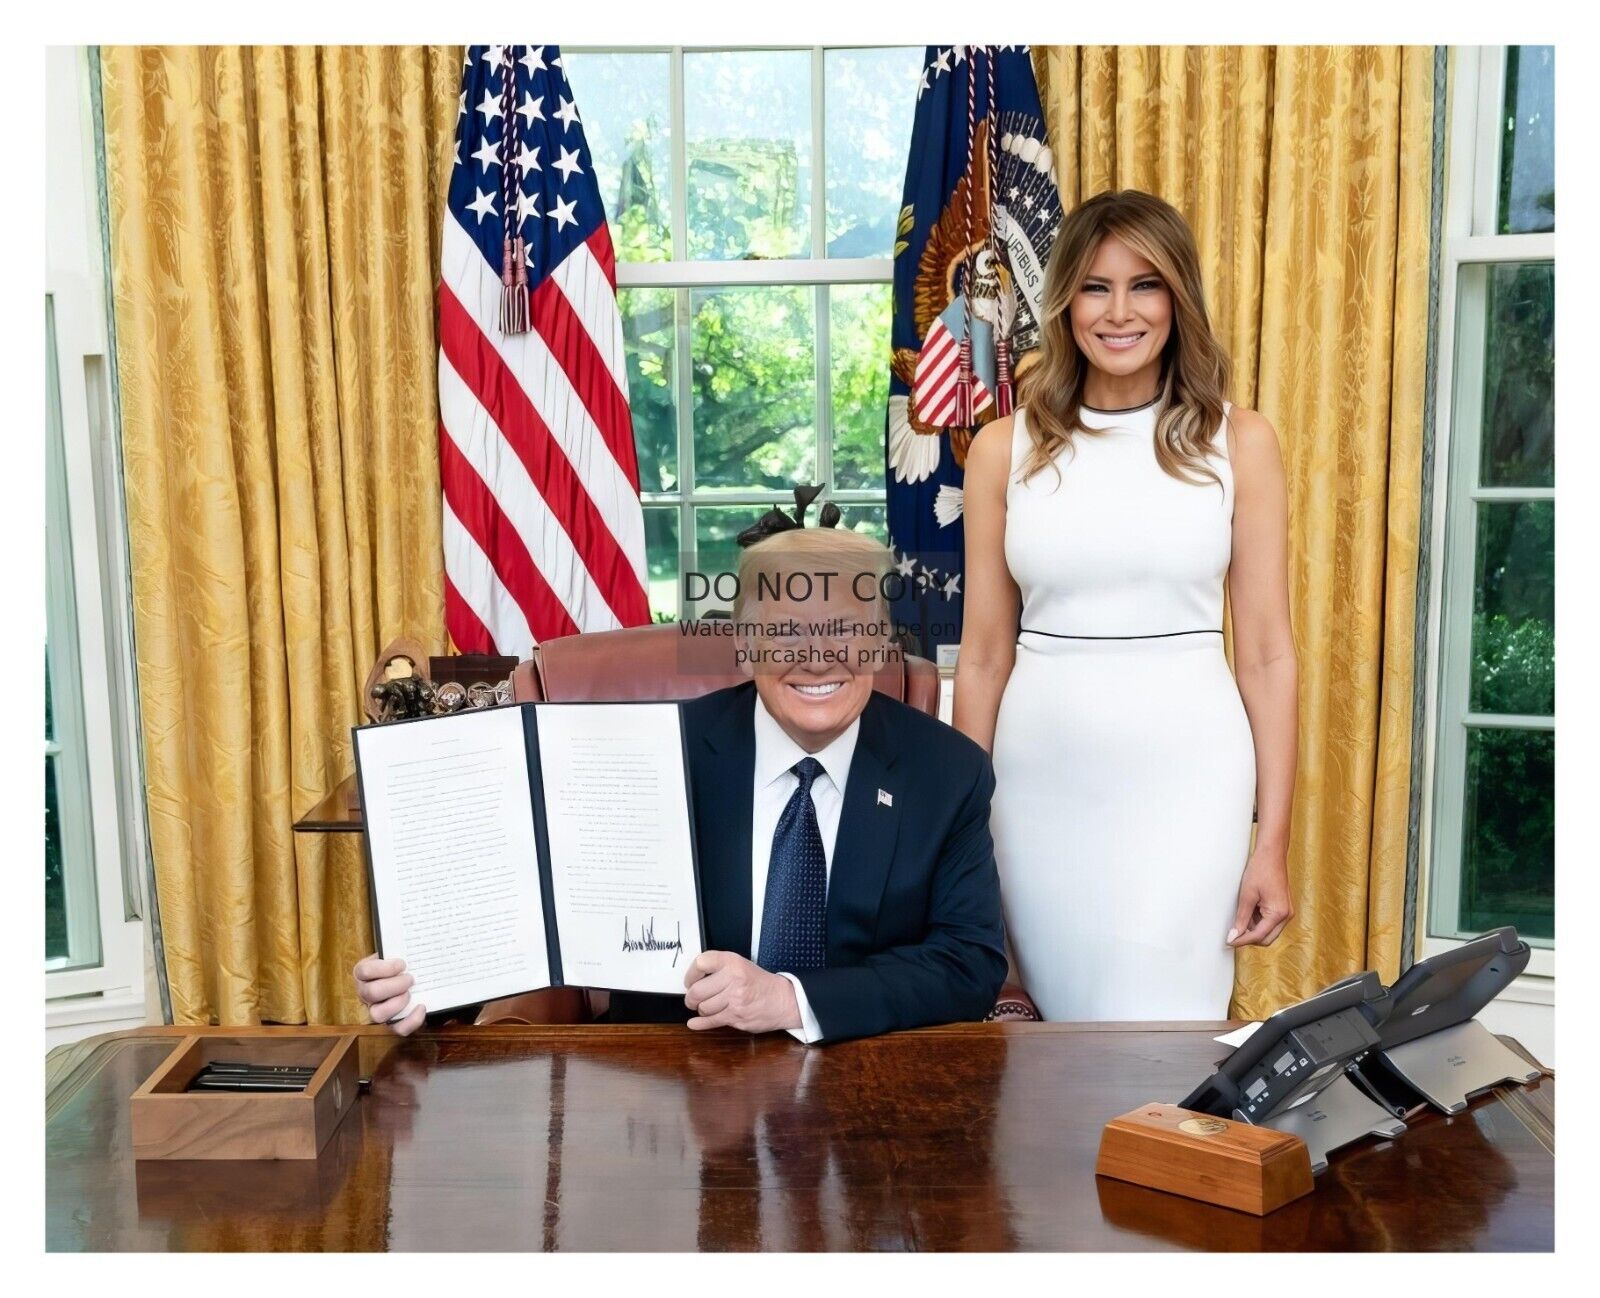 PRESIDENT DONALD TRUMP AND FIRST LADY MELANIA TRUMP IN OVAL OFFICE 8X10 PHOTO